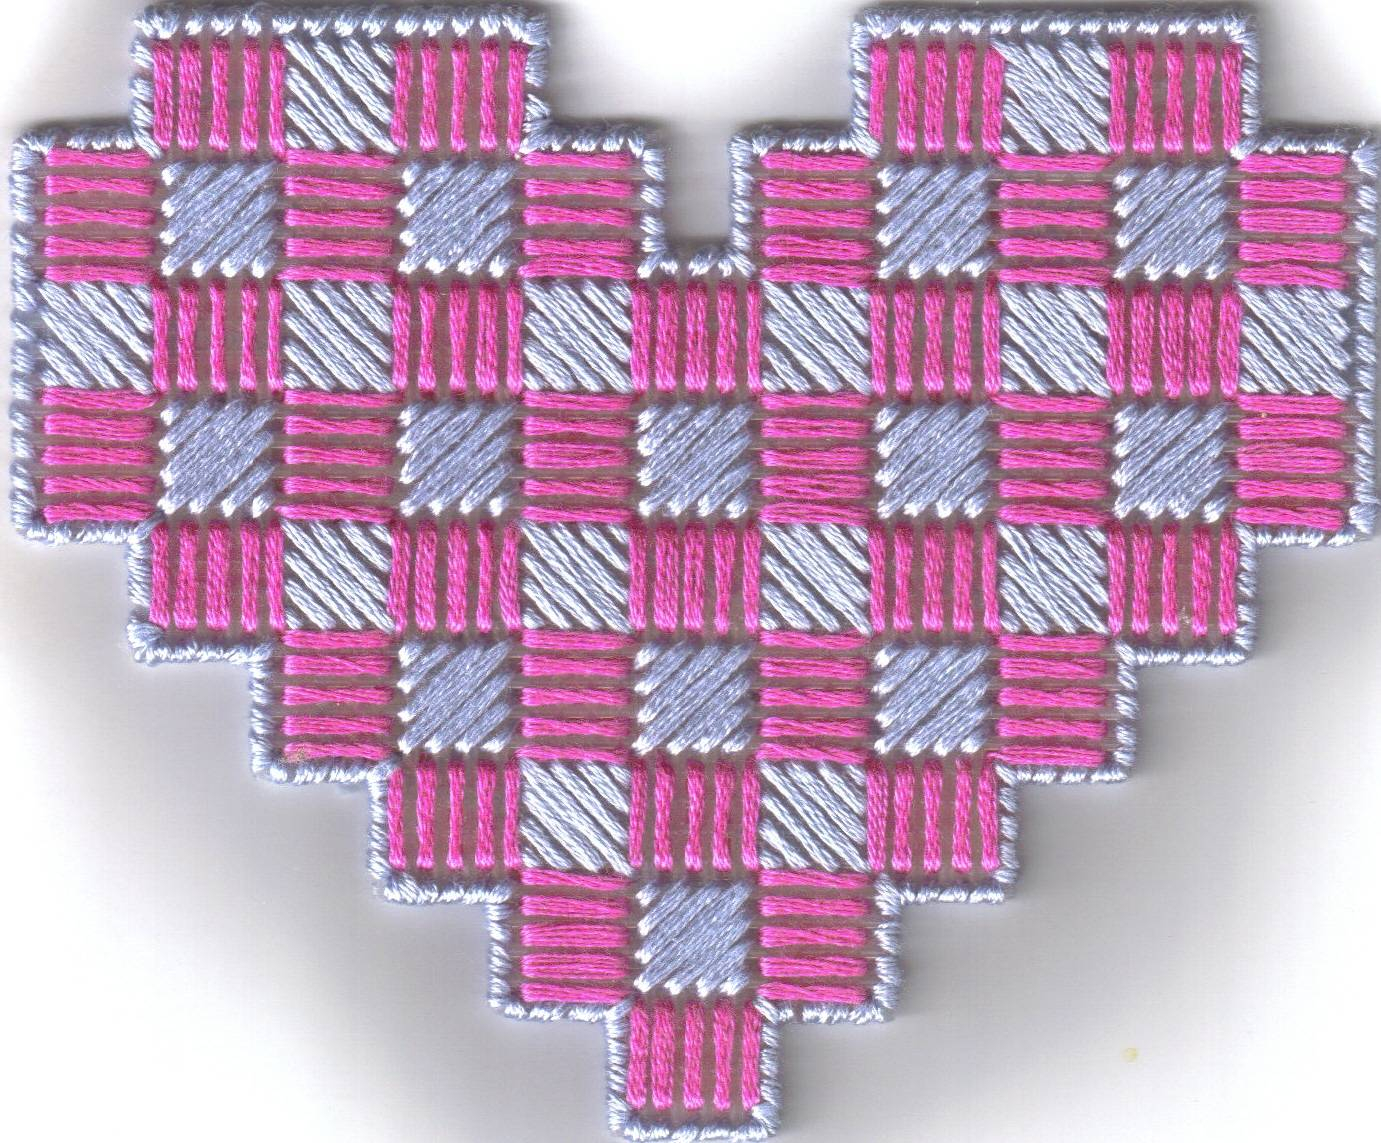 Hardanger Embroidery Patterns Online Free Machine Embroidery Articles This Model Of The Free Satin Heart